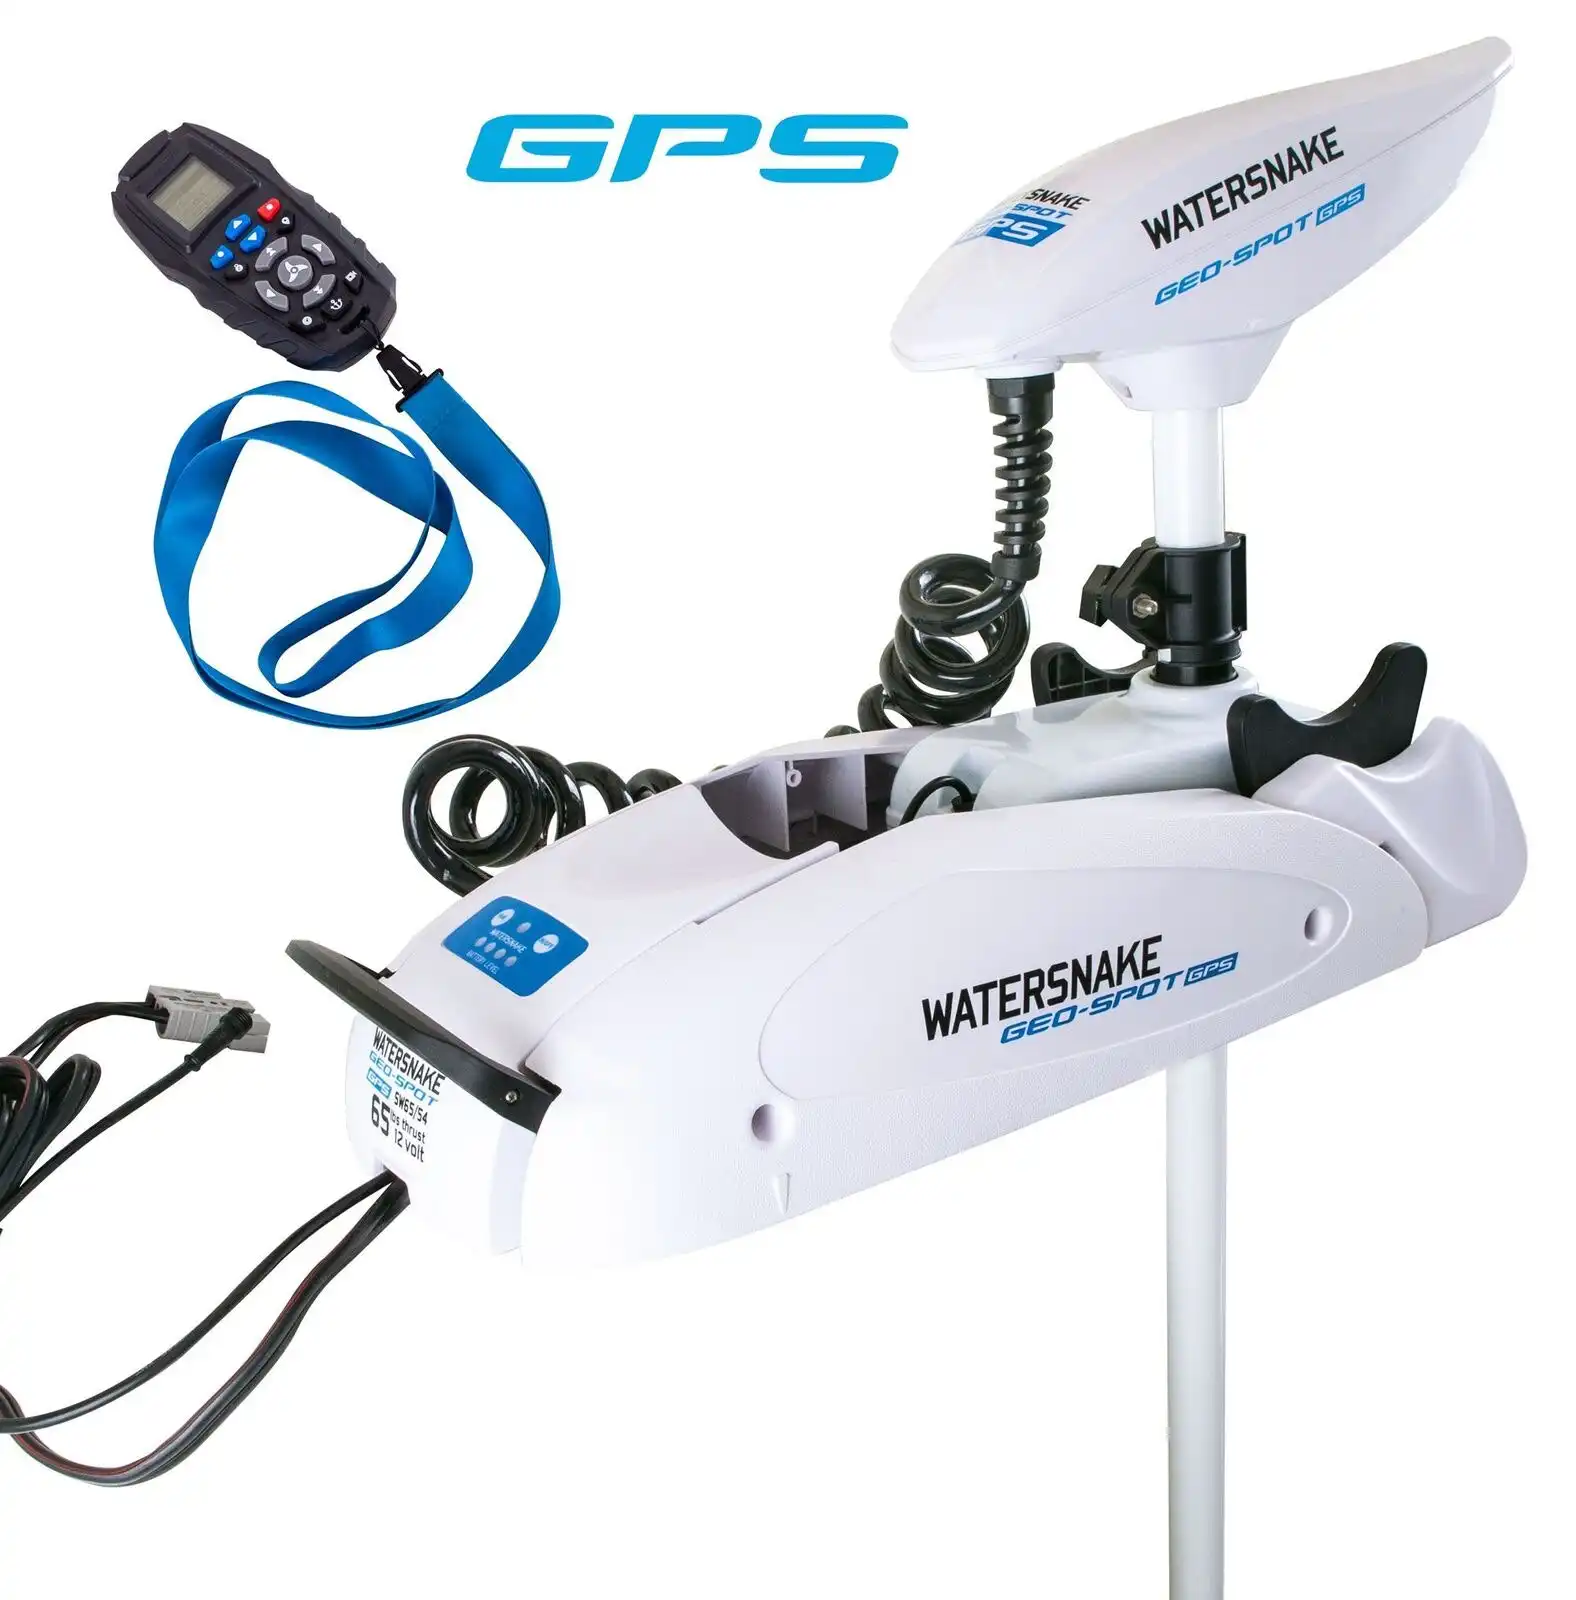 Watersnake Geo Spot 65/66 Remote Control GPS Bow Mount Electric Motor-65lb Thrust